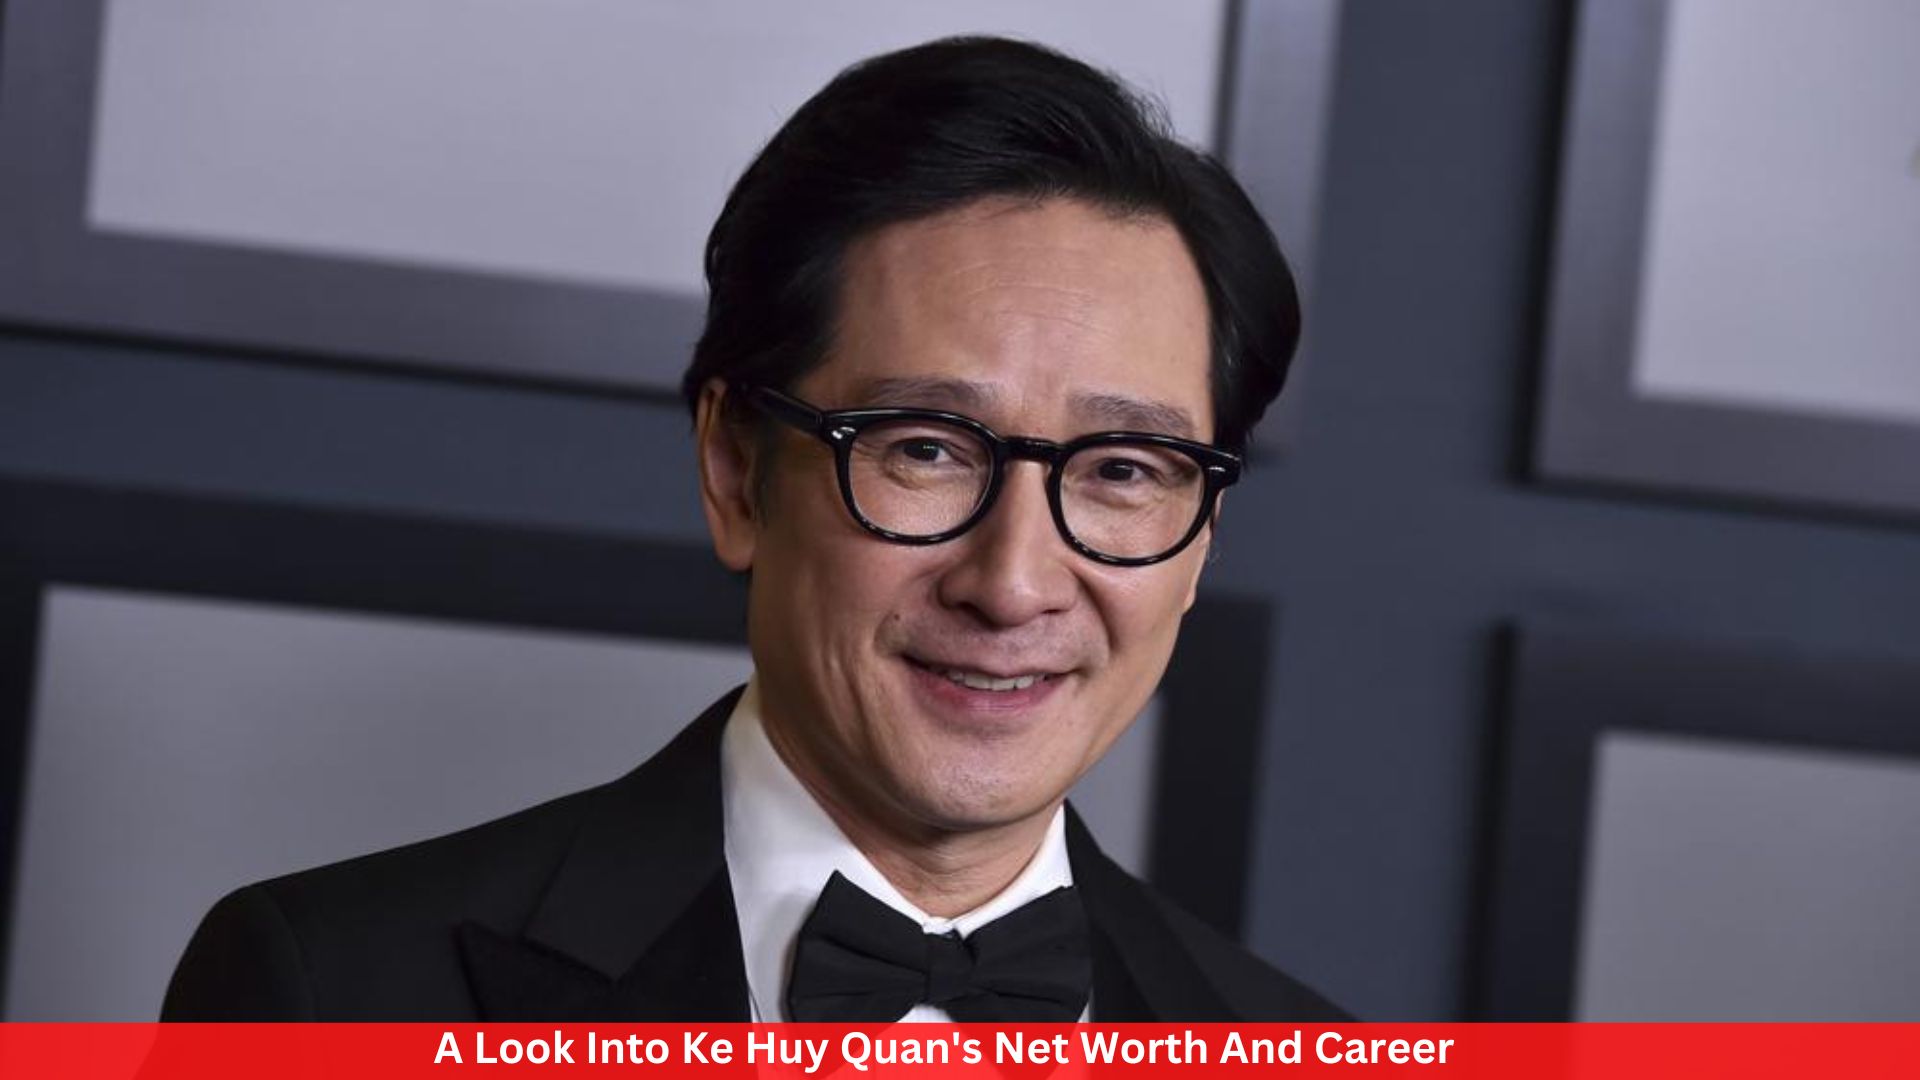 A Look Into Ke Huy Quan's Net Worth And Career